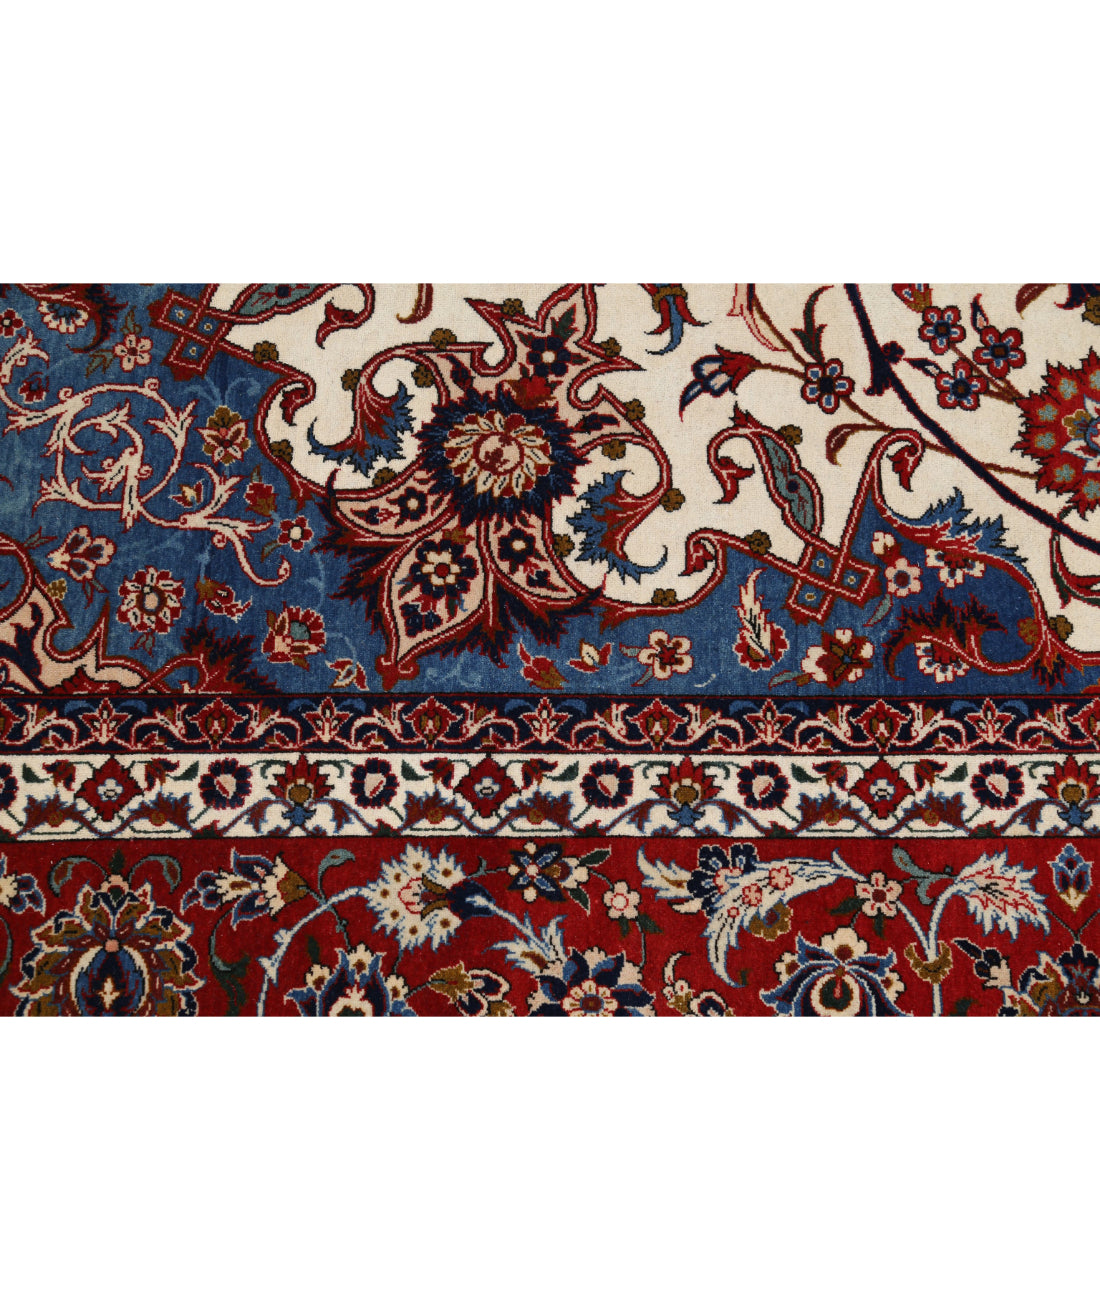 Hand Knotted Masterpiece Persian Isfahan Wool Rug - 10'3'' x 14'7'' 10'3'' x 14'7'' (308 X 438) / Ivory / Red